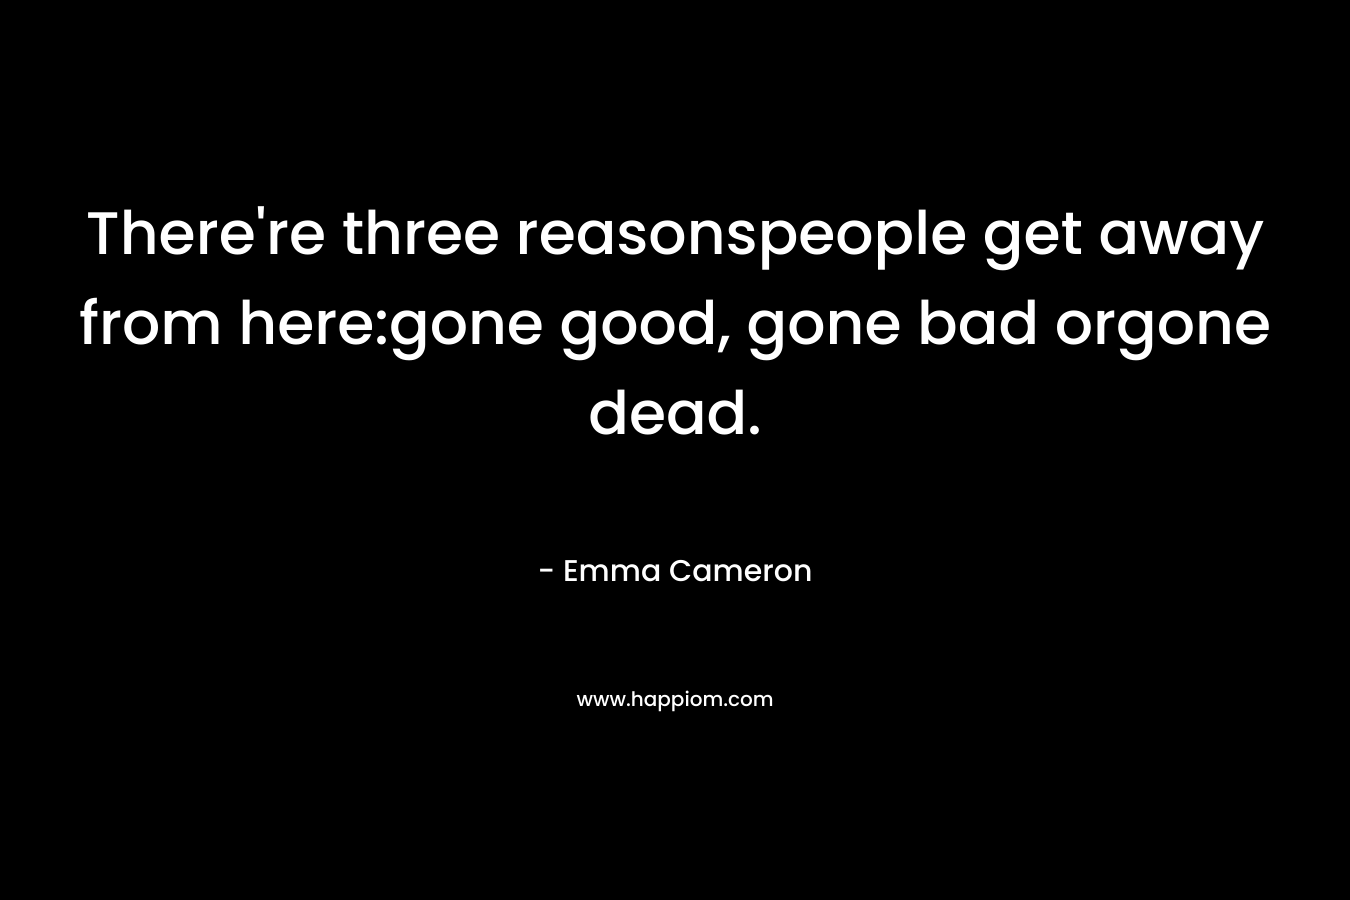 There’re three reasonspeople get away from here:gone good, gone bad orgone dead. – Emma Cameron